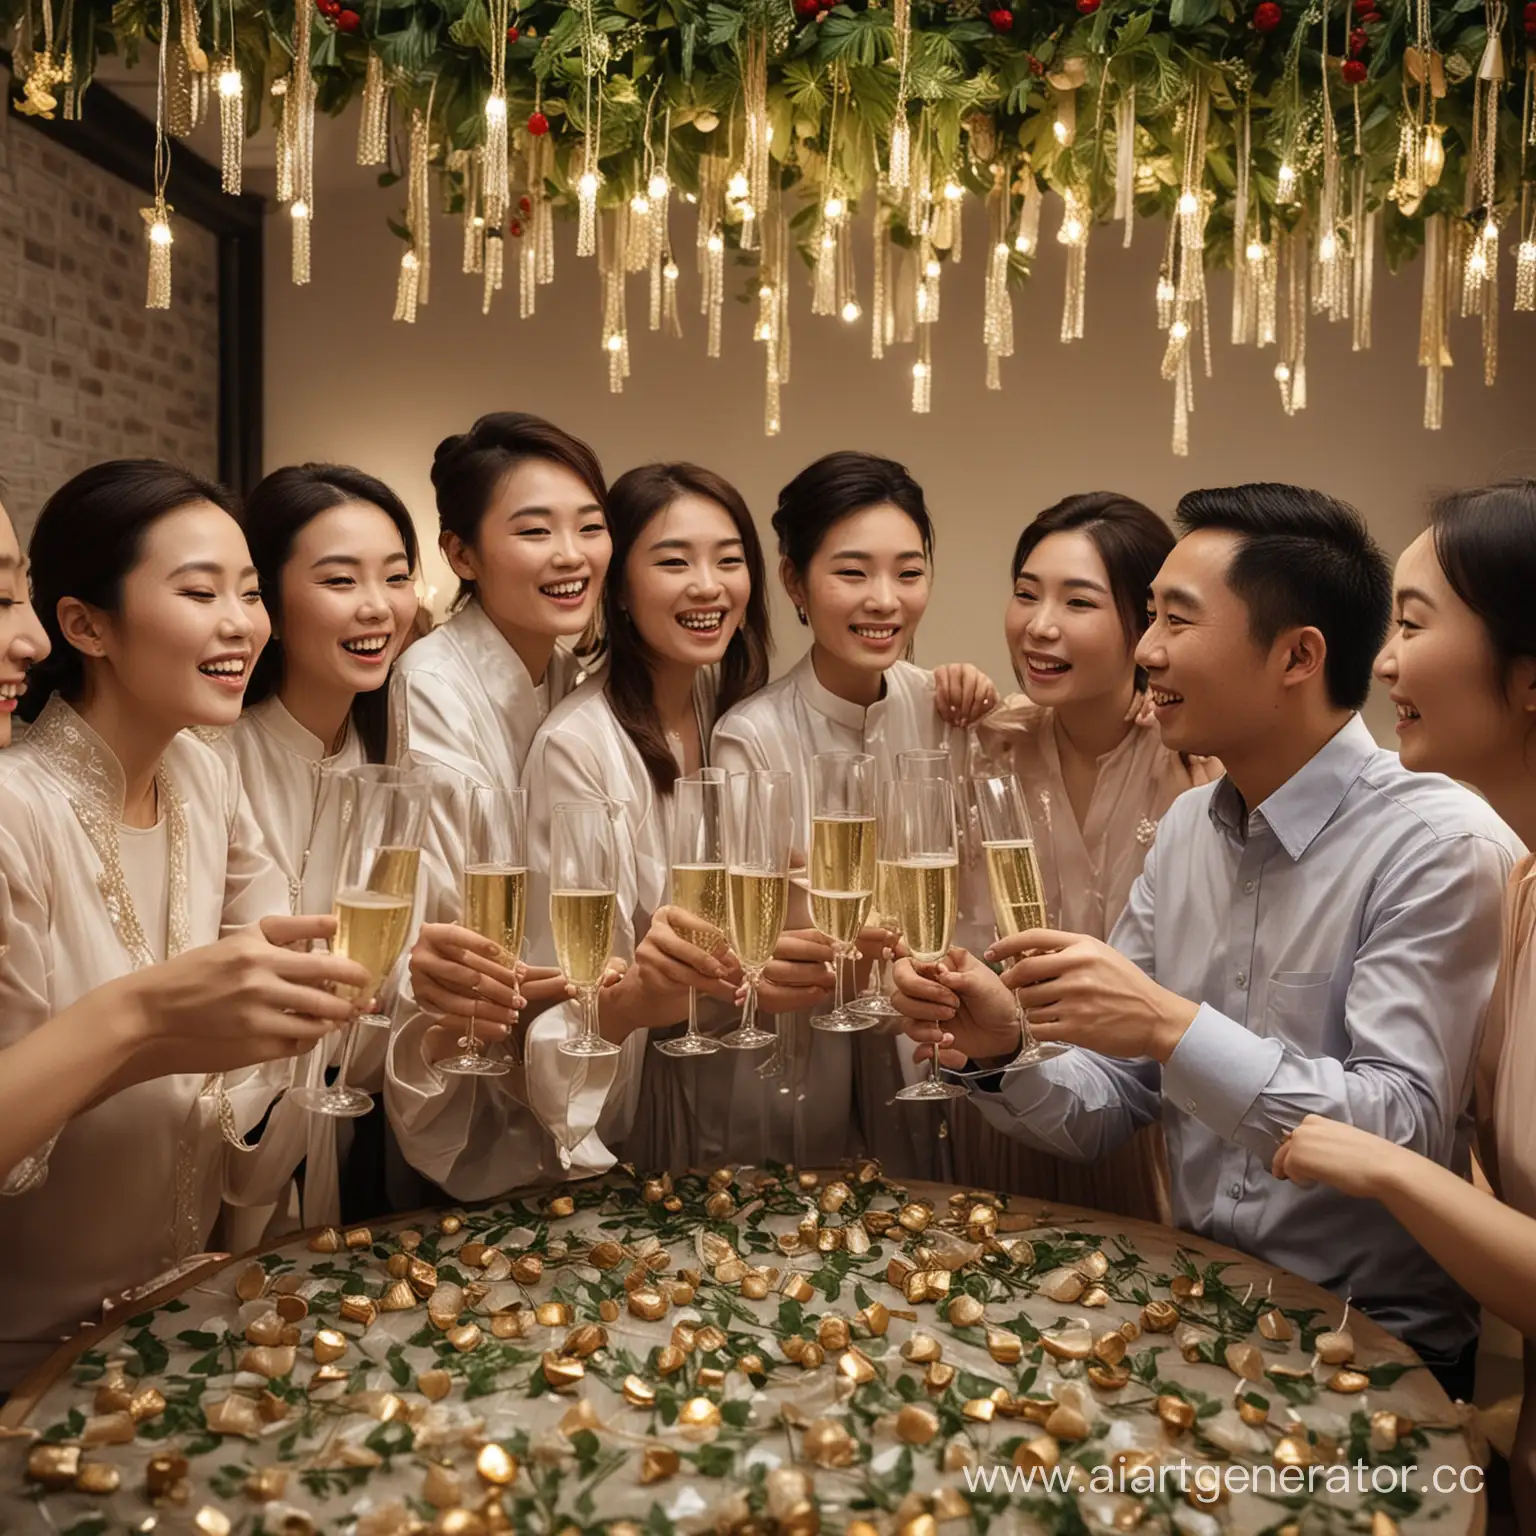 Chinese-Party-Guests-Celebrating-with-Champagne-Under-Festive-Garlands